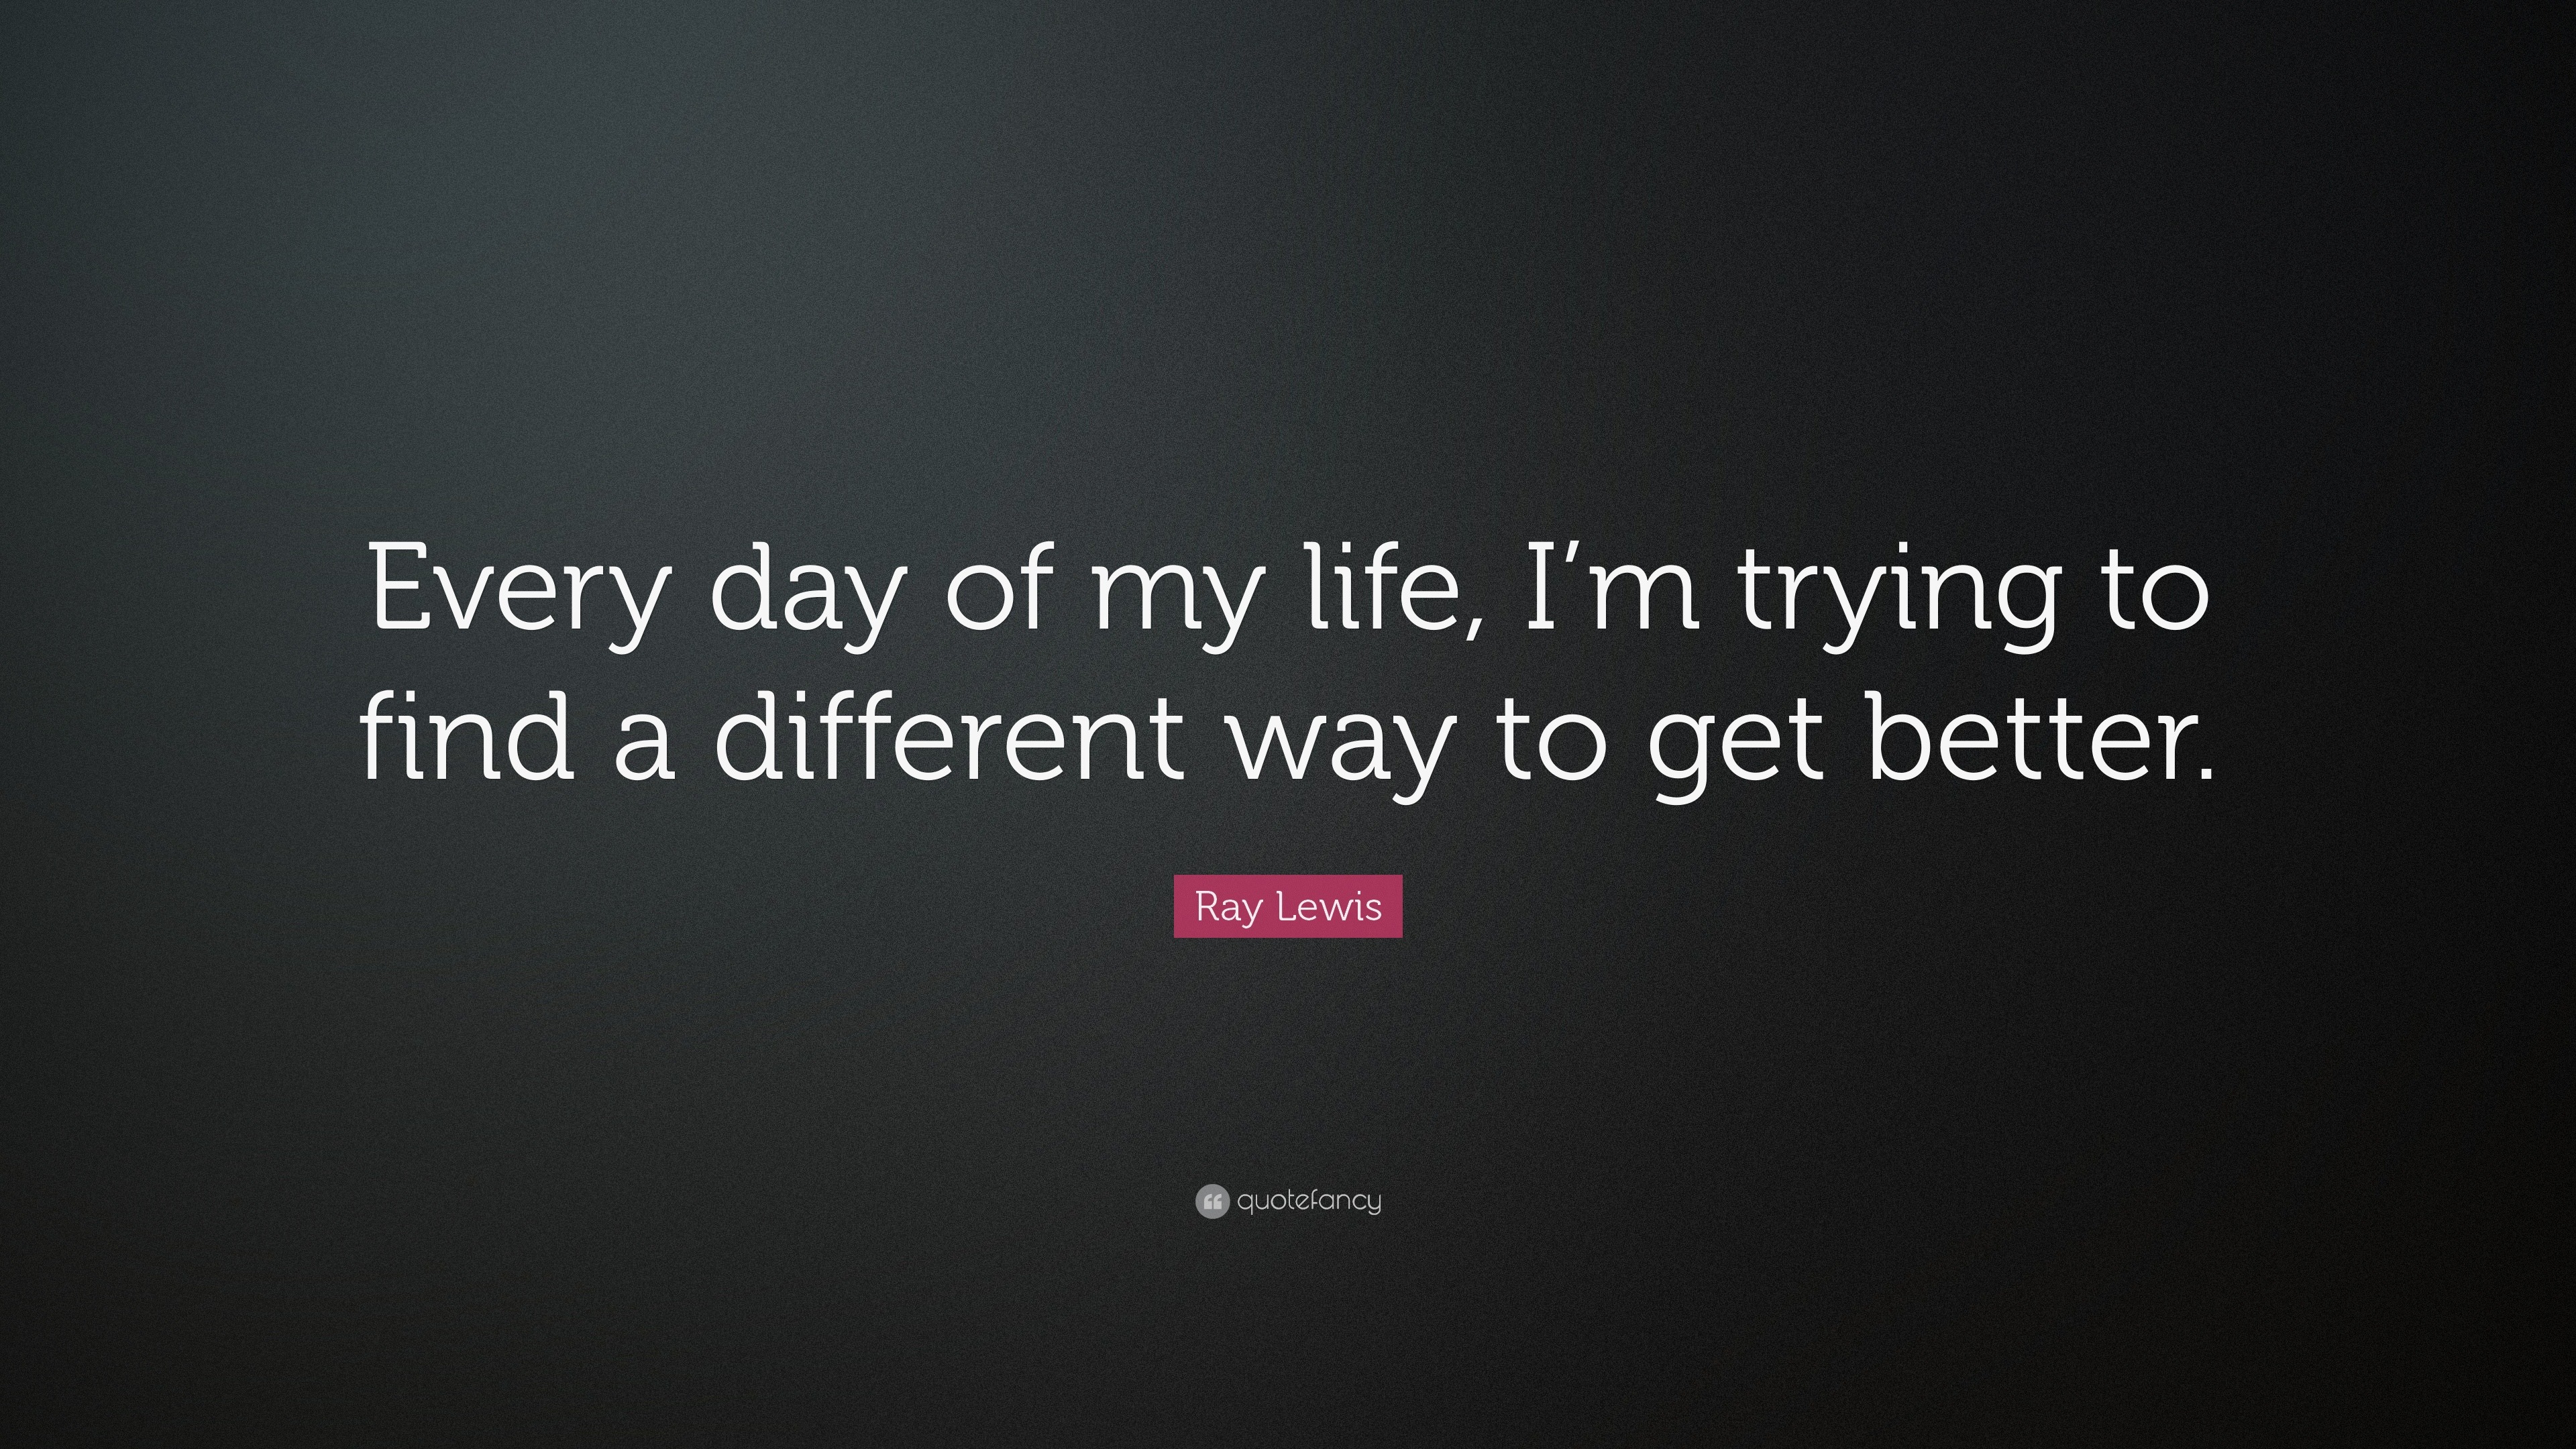 Ray Lewis Quote “Every day of my life I m trying to